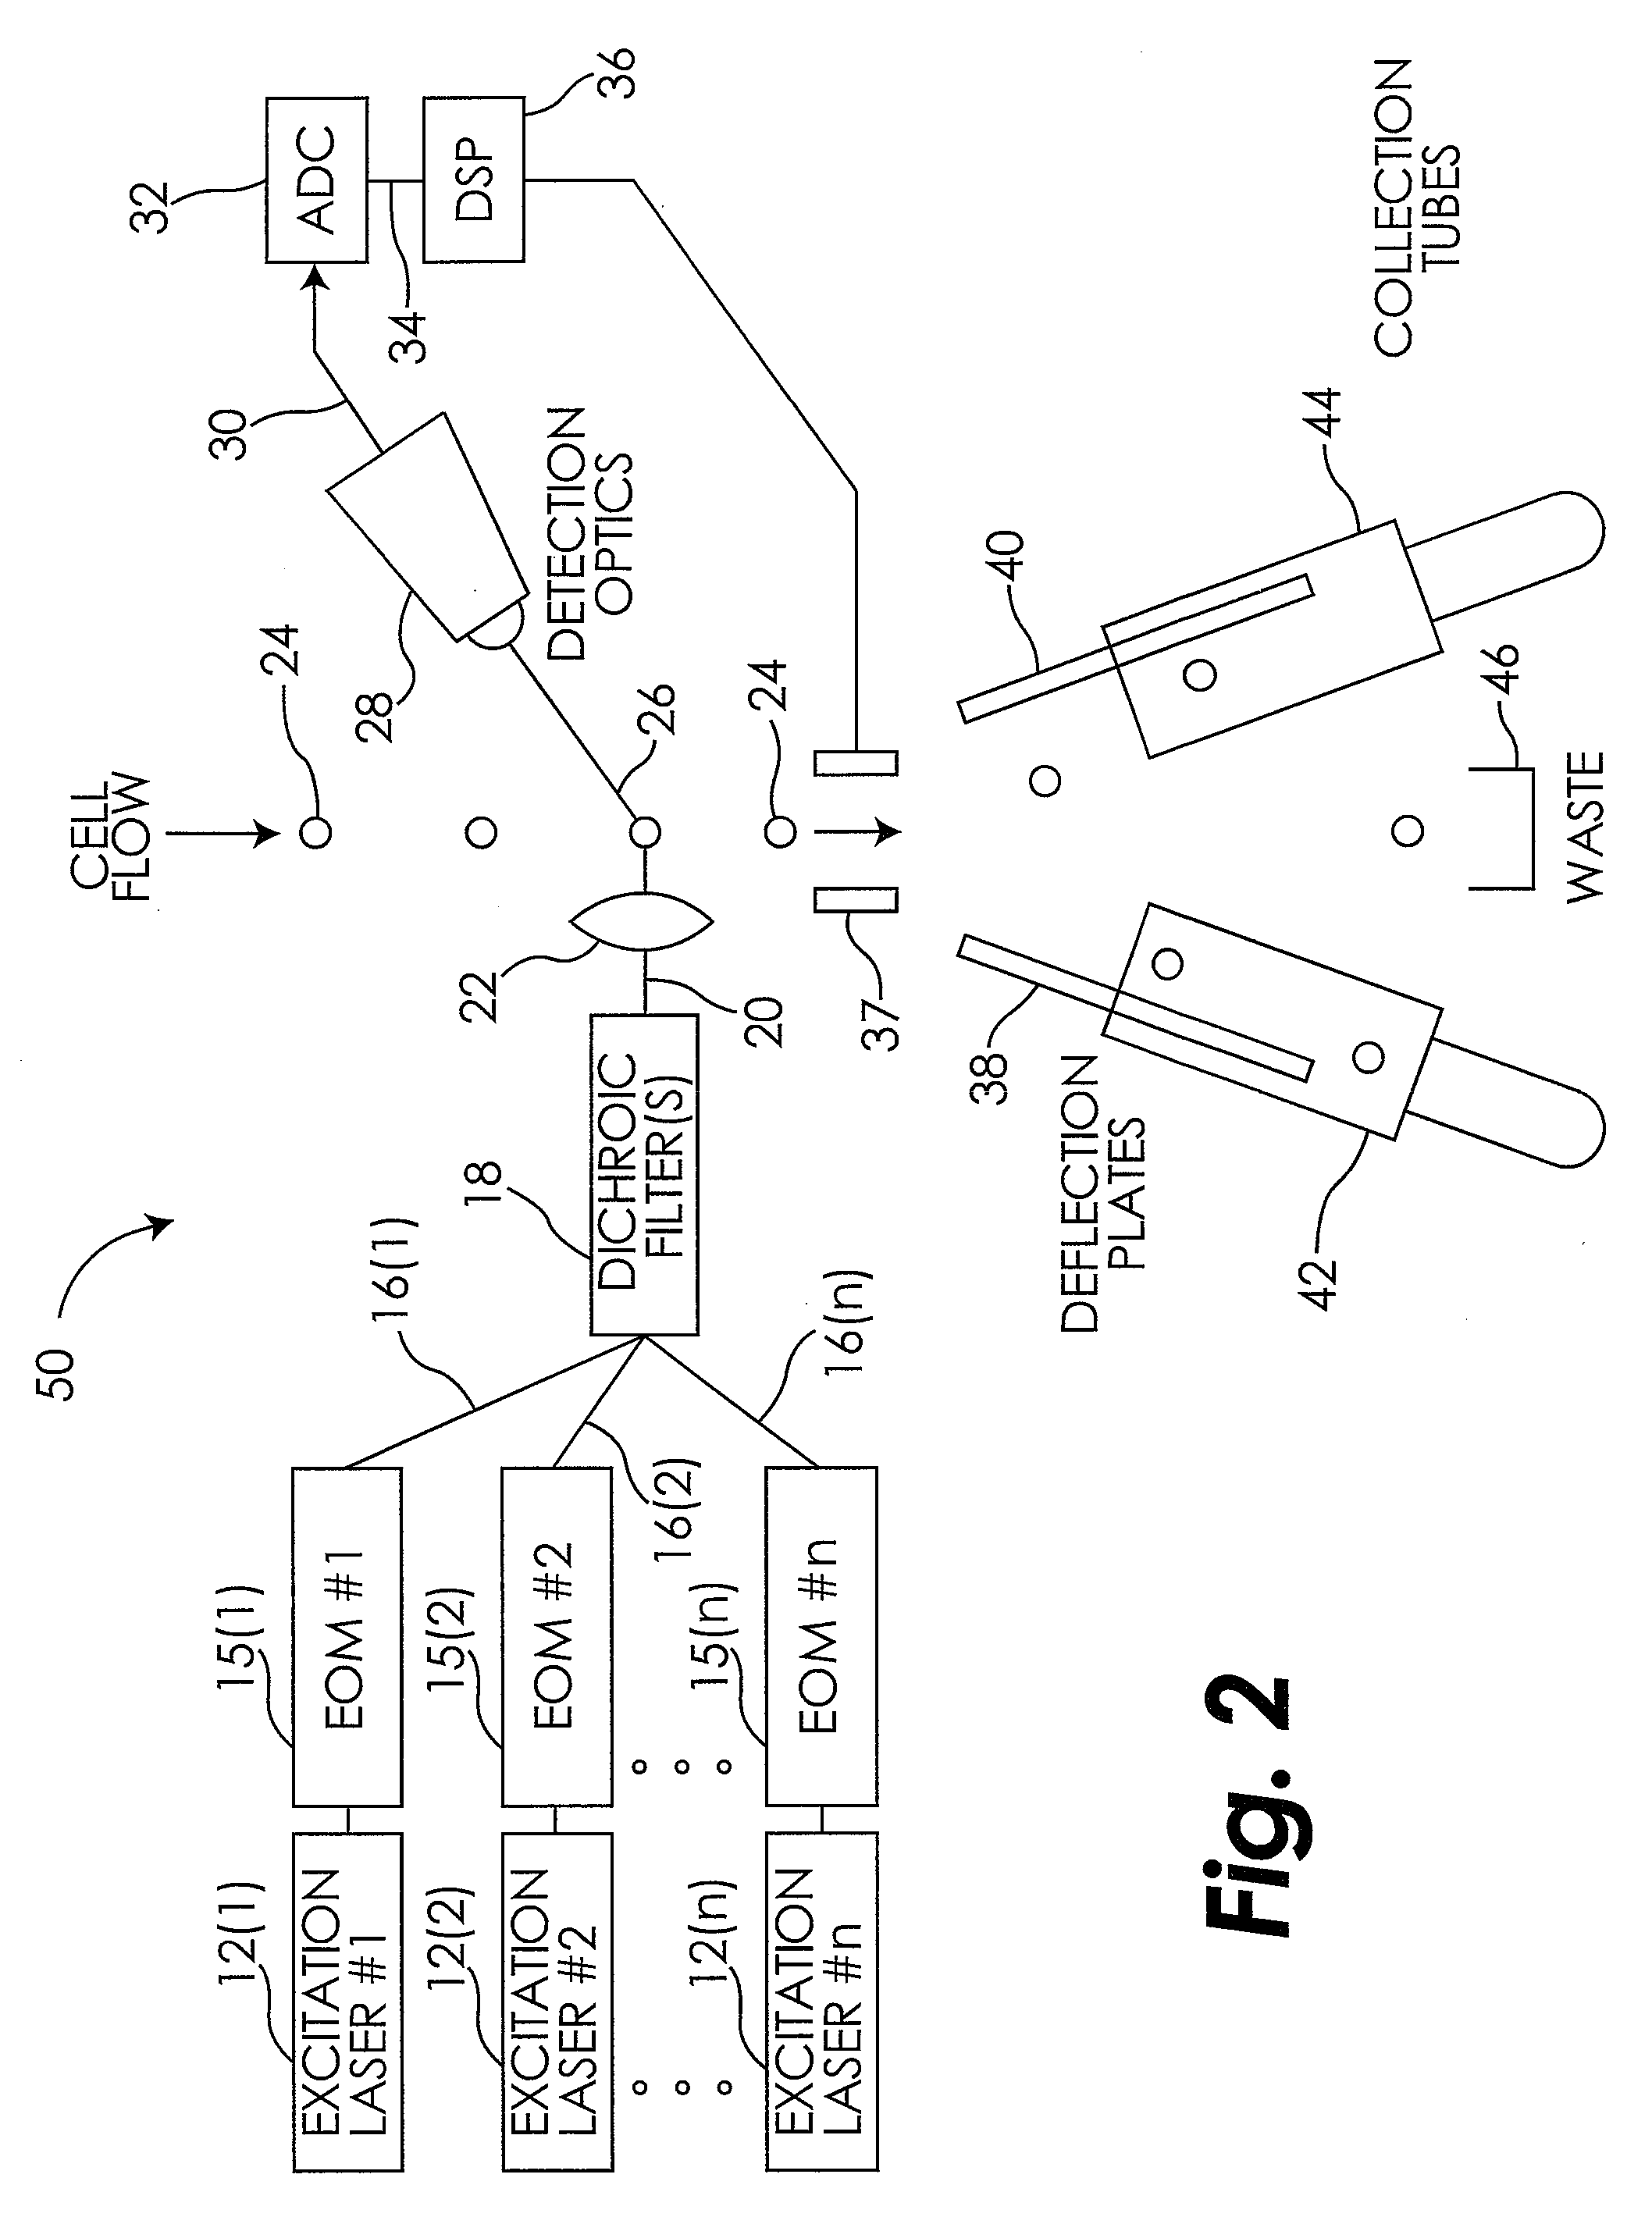 System and method for the measurement of multiple fluorescence emissions in a flow cytometry system